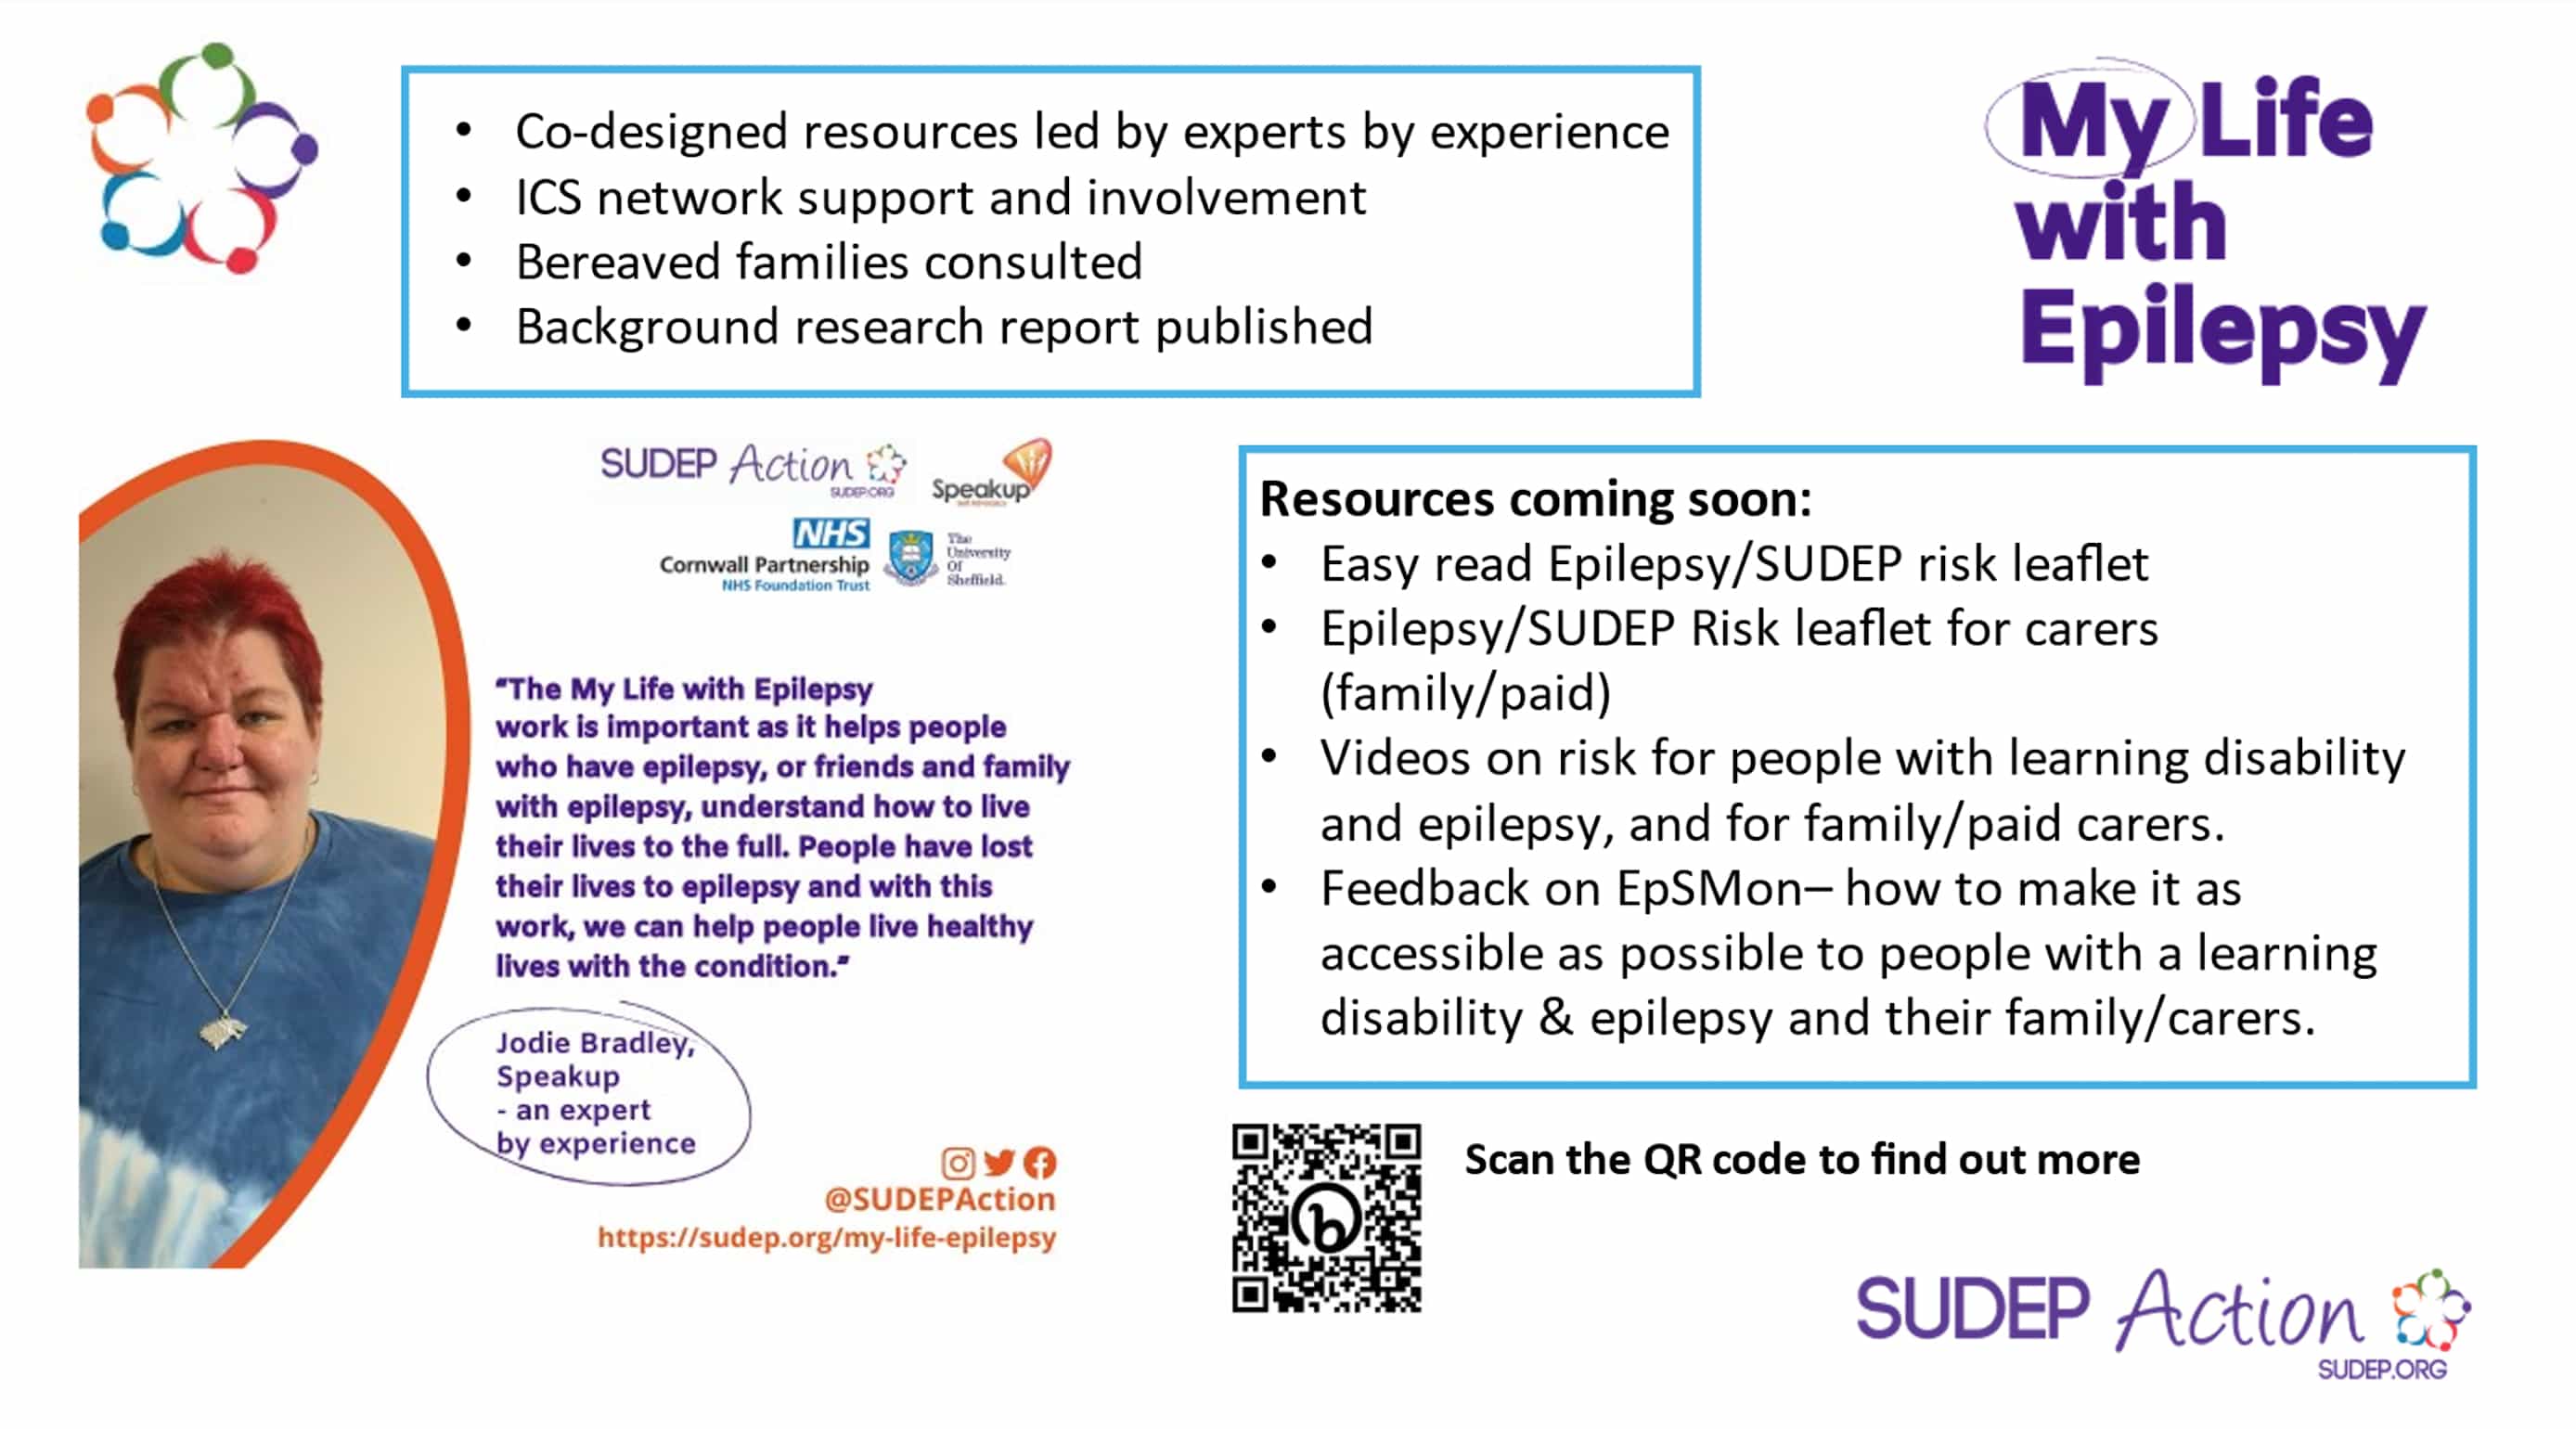 An image explaining the My Life with Epilepsy resources.